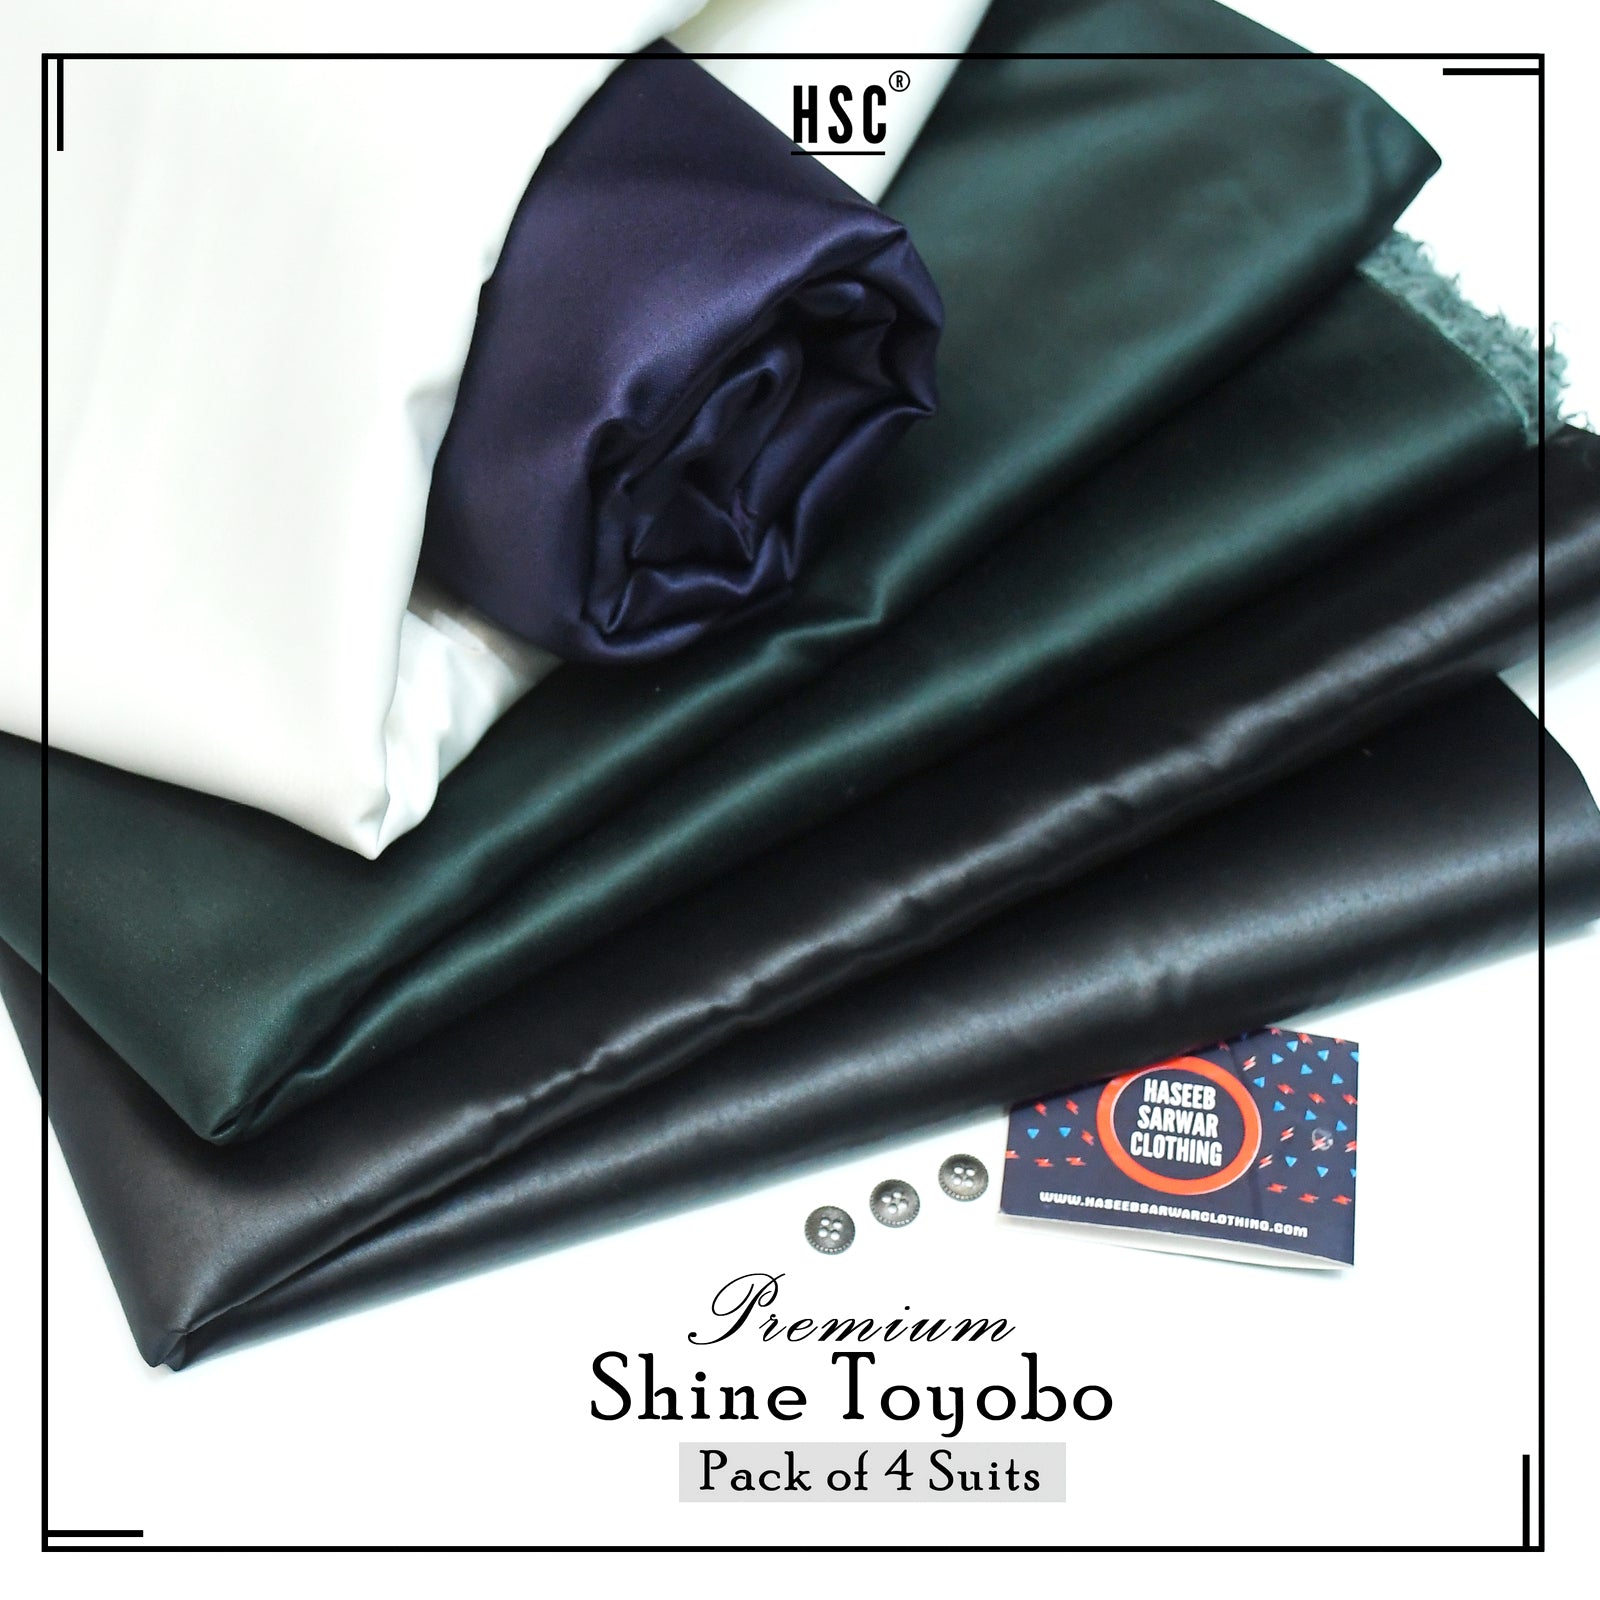 Shine Toyobo Pack of 4 Suits HSC